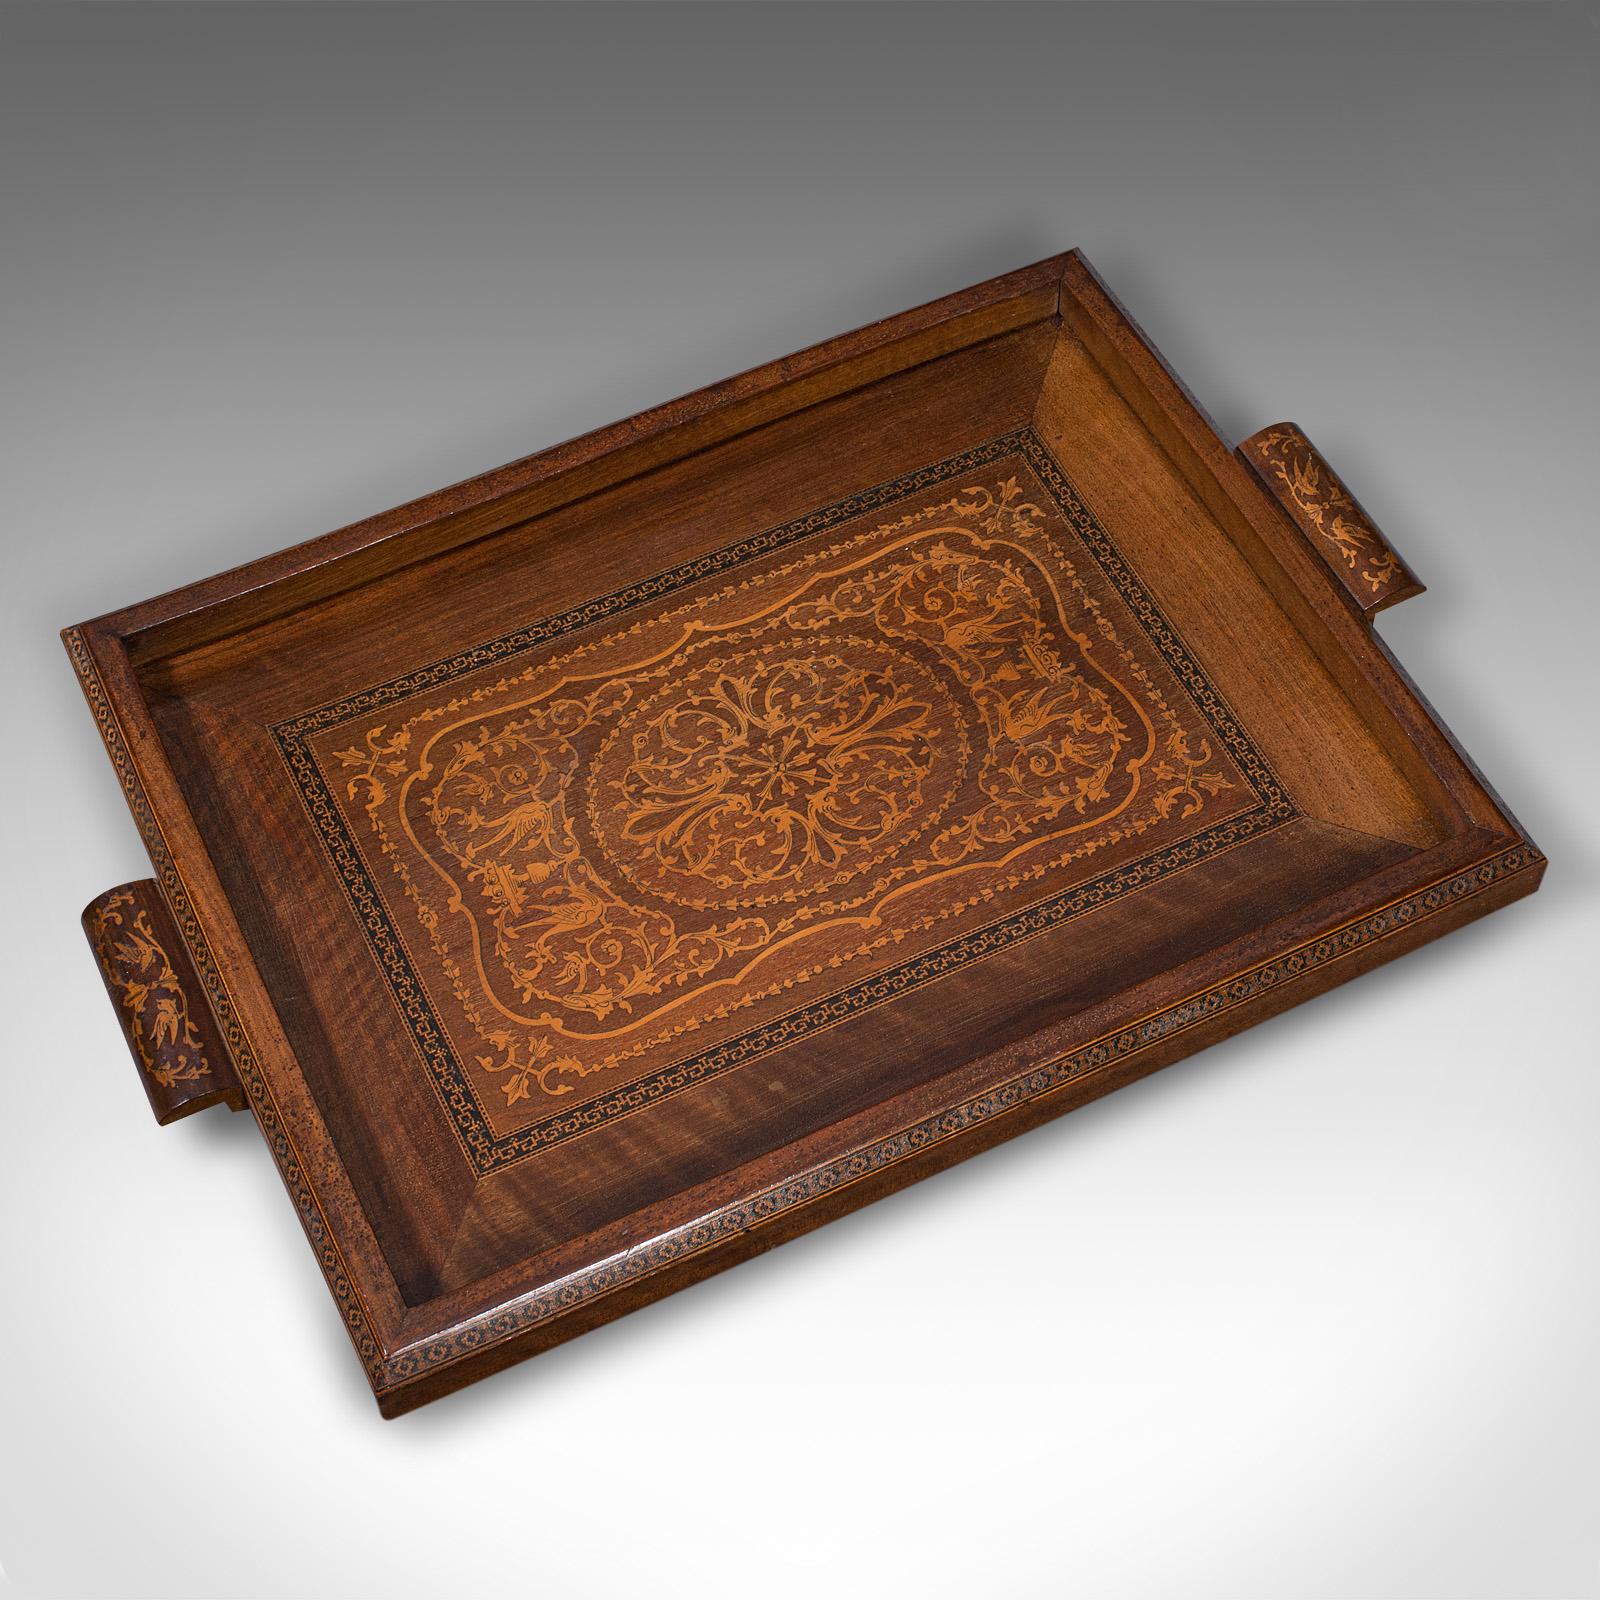 Wood Antique Inlaid Serving Tray, Anglo Indian, Colonial, Afternoon Tea, Victorian